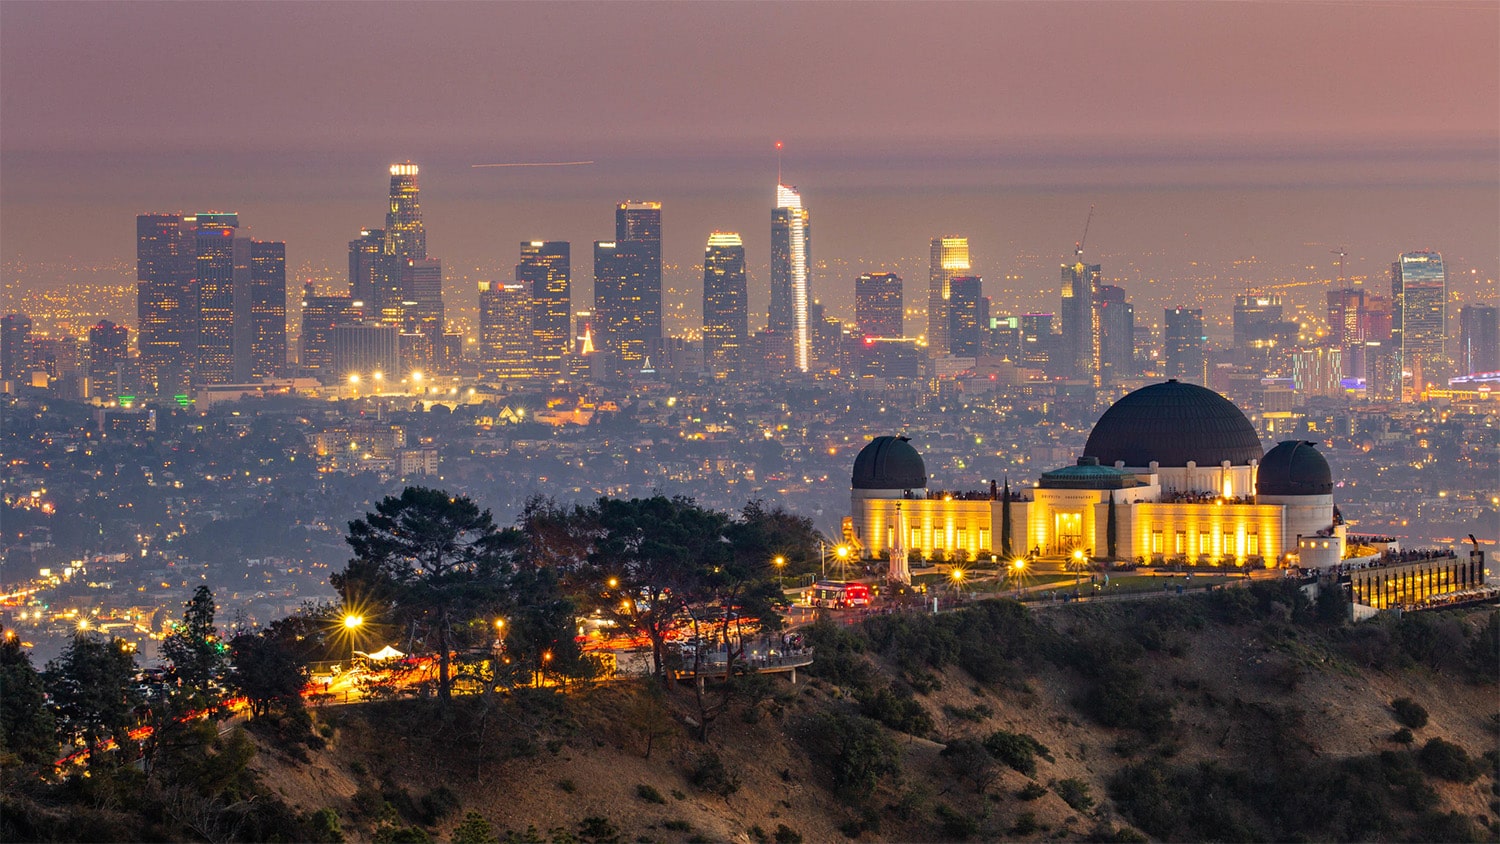 35 interesting facts about Los Angeles